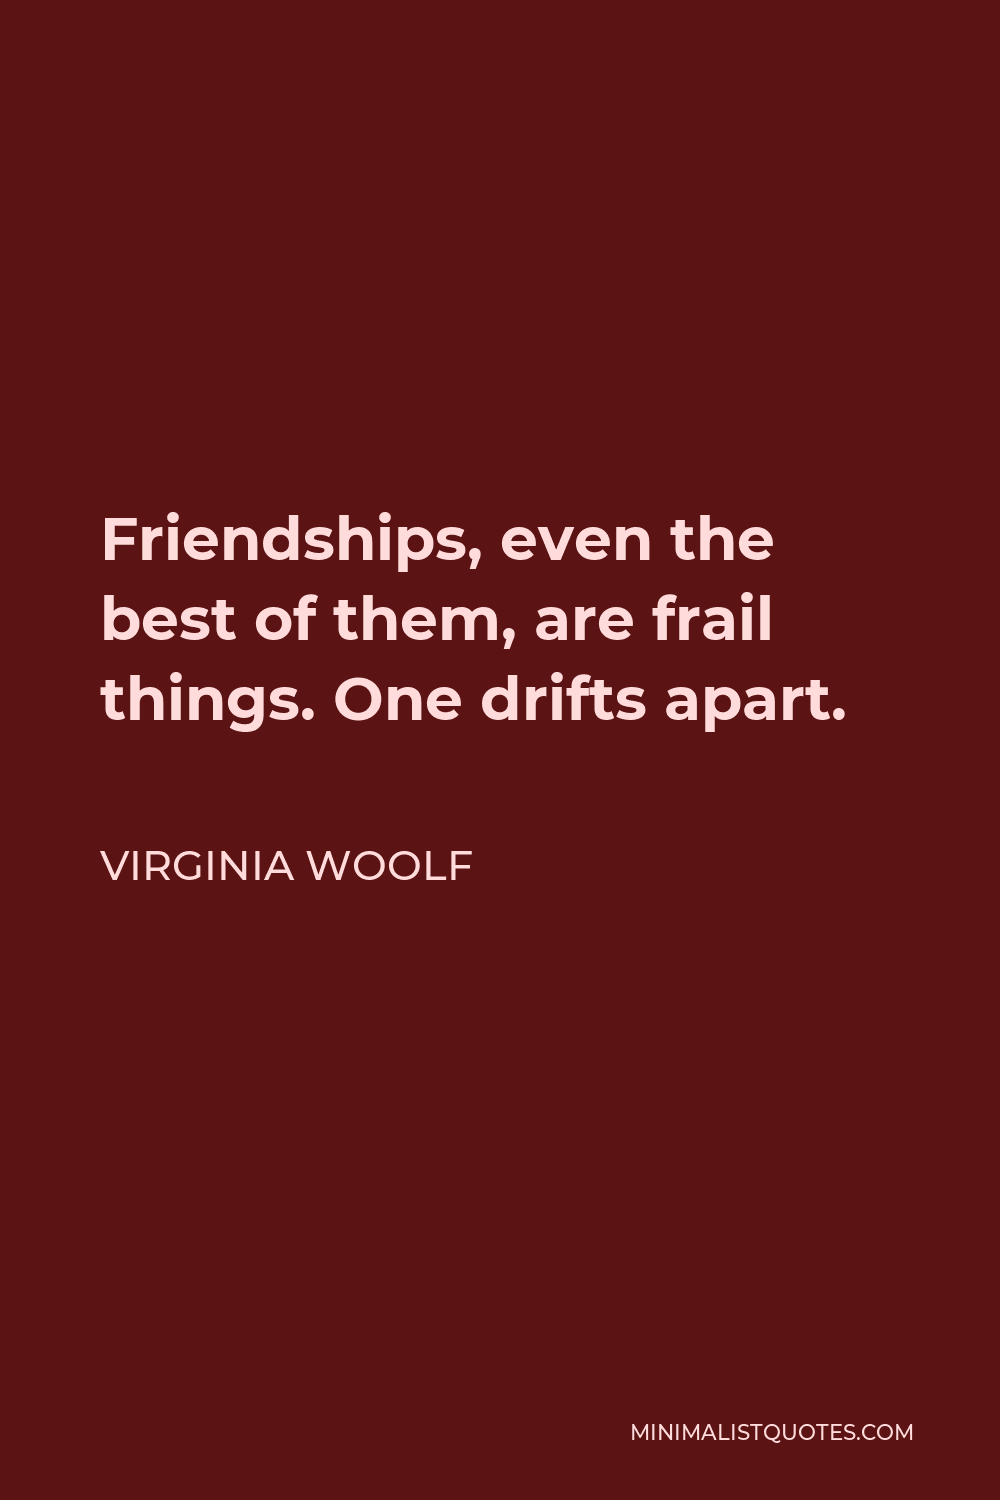 Virginia Woolf Quote - Friendships, even the best of them, are frail things. One drifts apart.